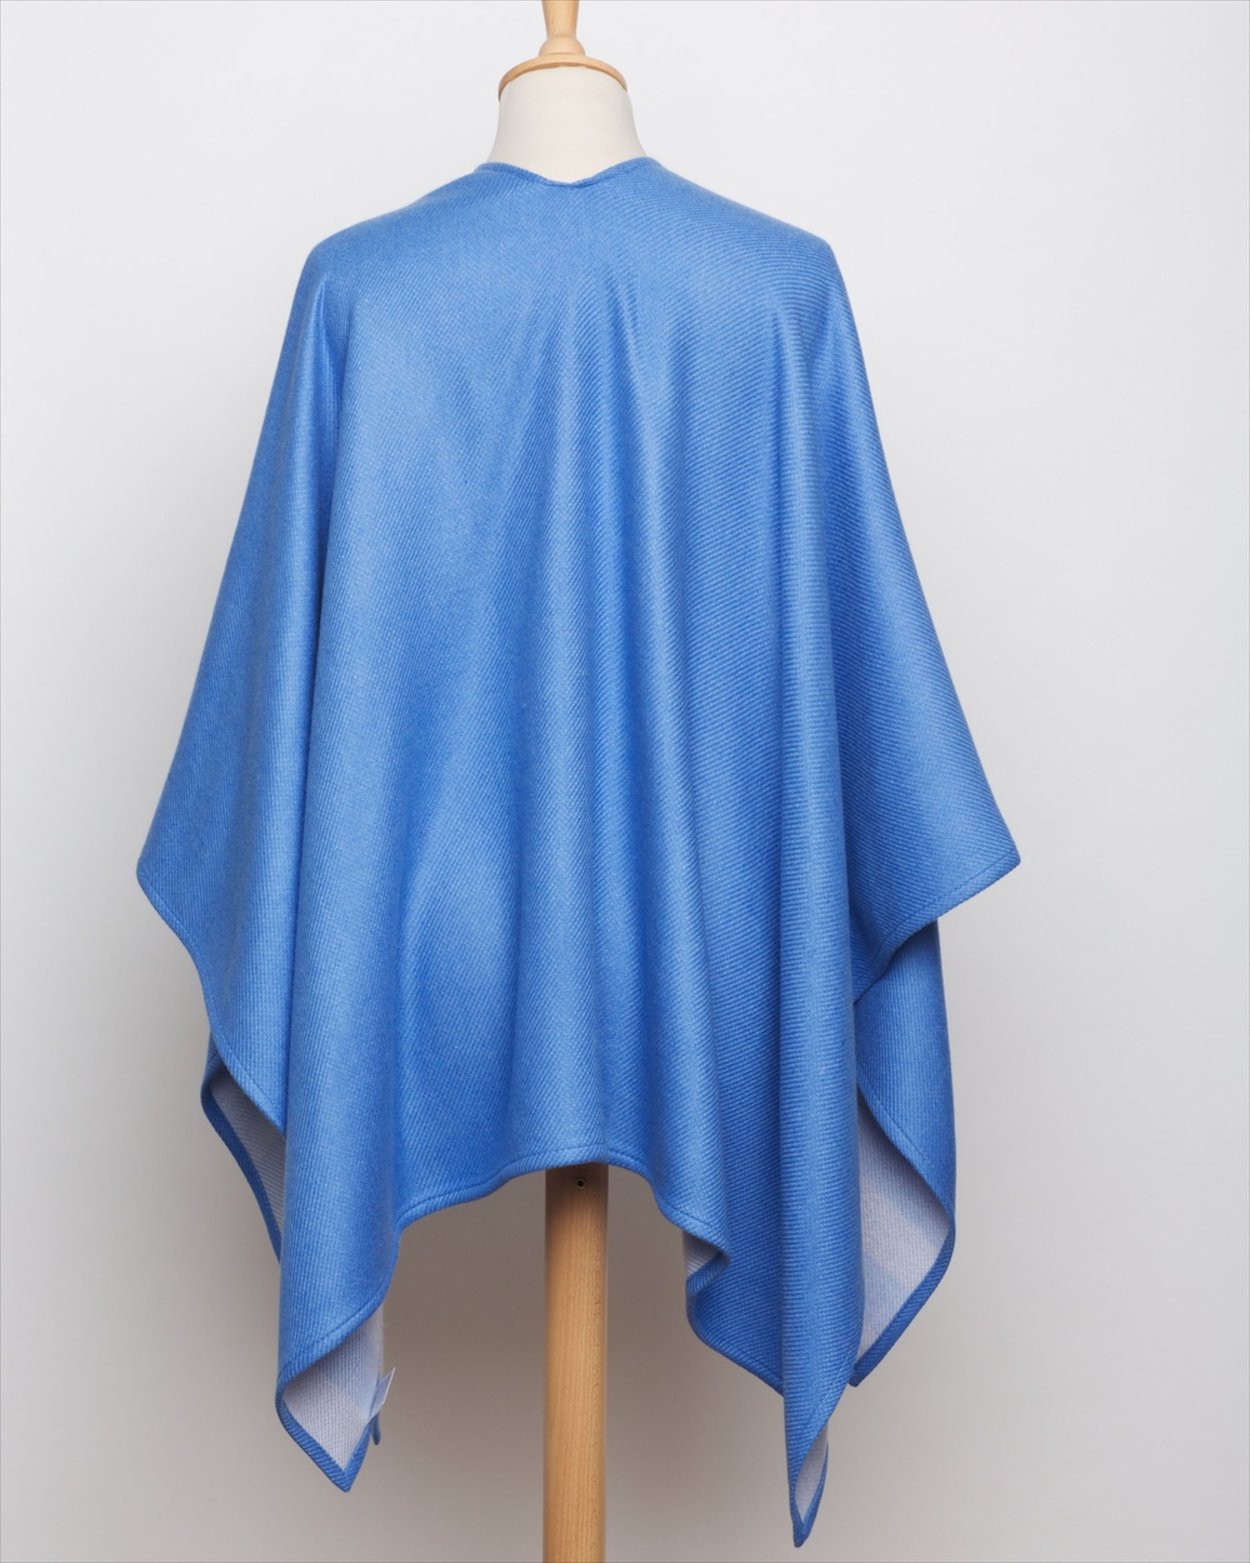 Cove Double Sided Cape | Woven in the Mill | Avoca Ireland